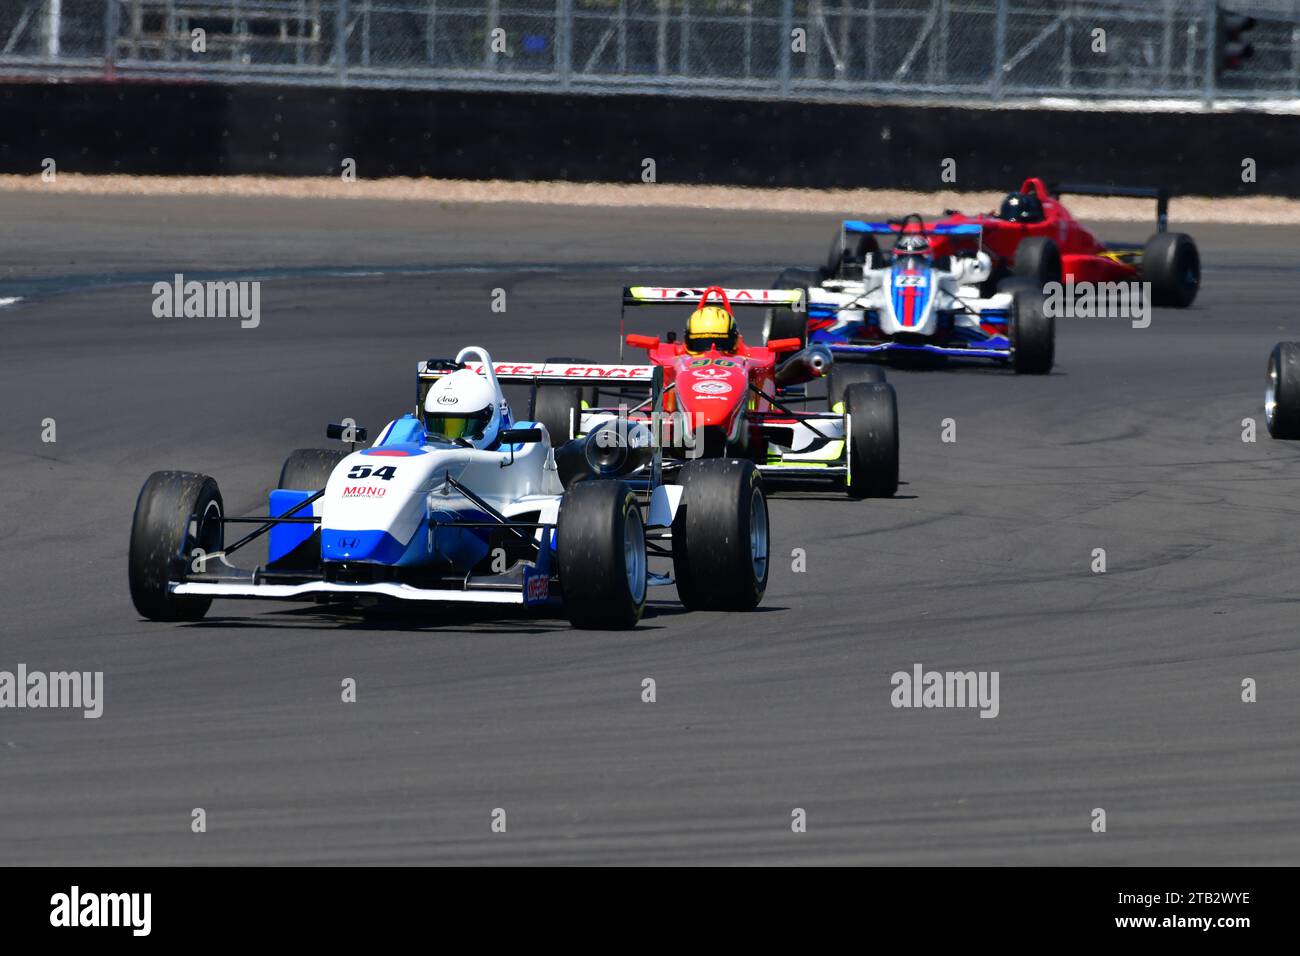 Karl O'Brien, Dallara F307, Monoposto Championship, Monoposto Racing Club, fifteen minutes of racing after a fifteen minute qualifying session, featur Stock Photo